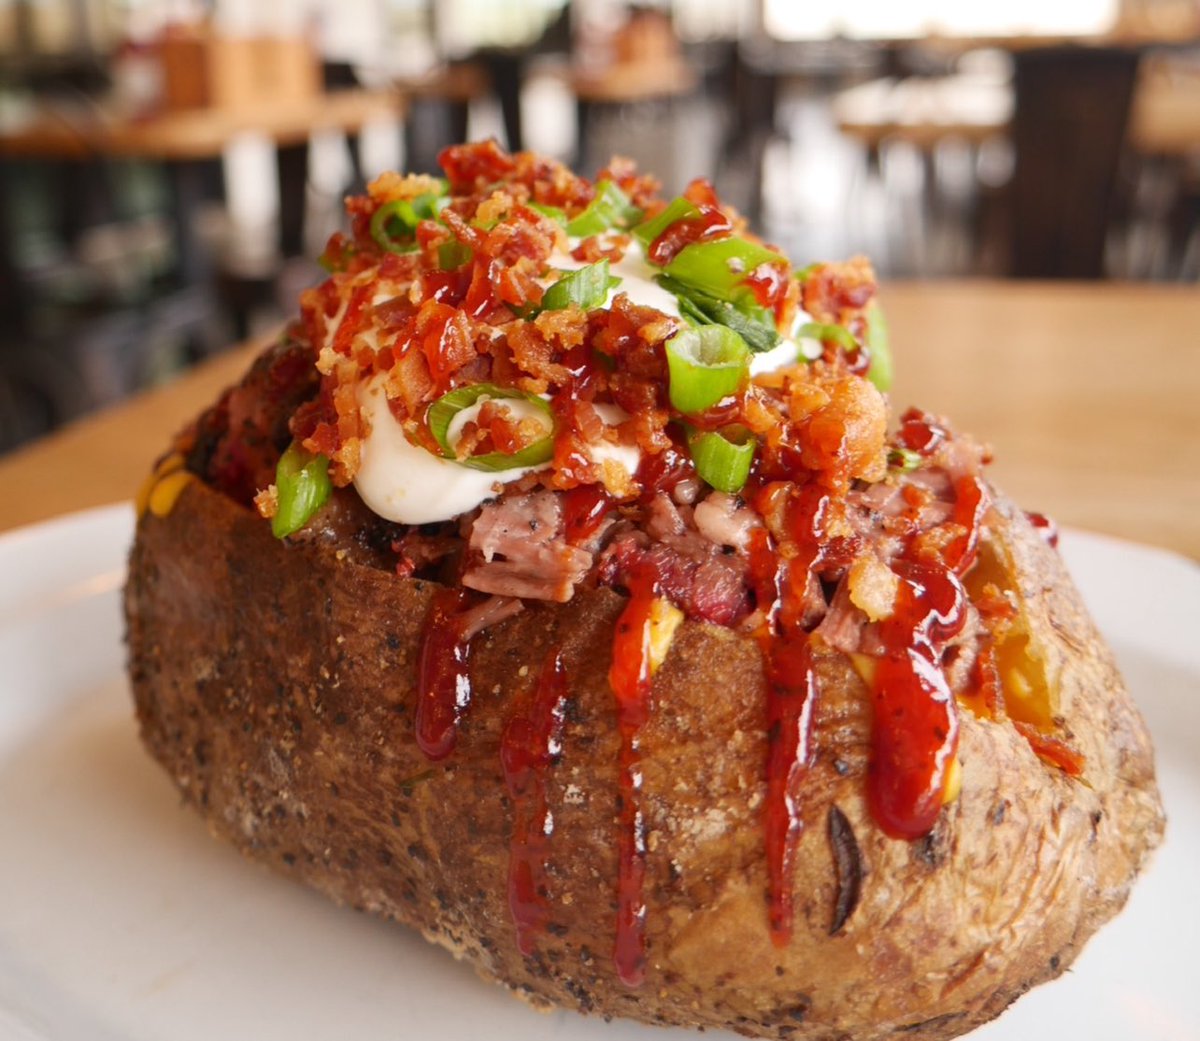 🥔 THE CHOPPED BRISKET LOADED BAKED POTATO - 🔥 Giant Potato stuffed with Table Chopped Brisket, Butter, Sour Cream, Cheddar, Bacon, & Green Onion. Drizzled with house bbq sauce. Leading the pack this #Tuesday on the Daily Specials board. #StilesSwitchBBQ . #TexasBBQ #BBQ #ATX